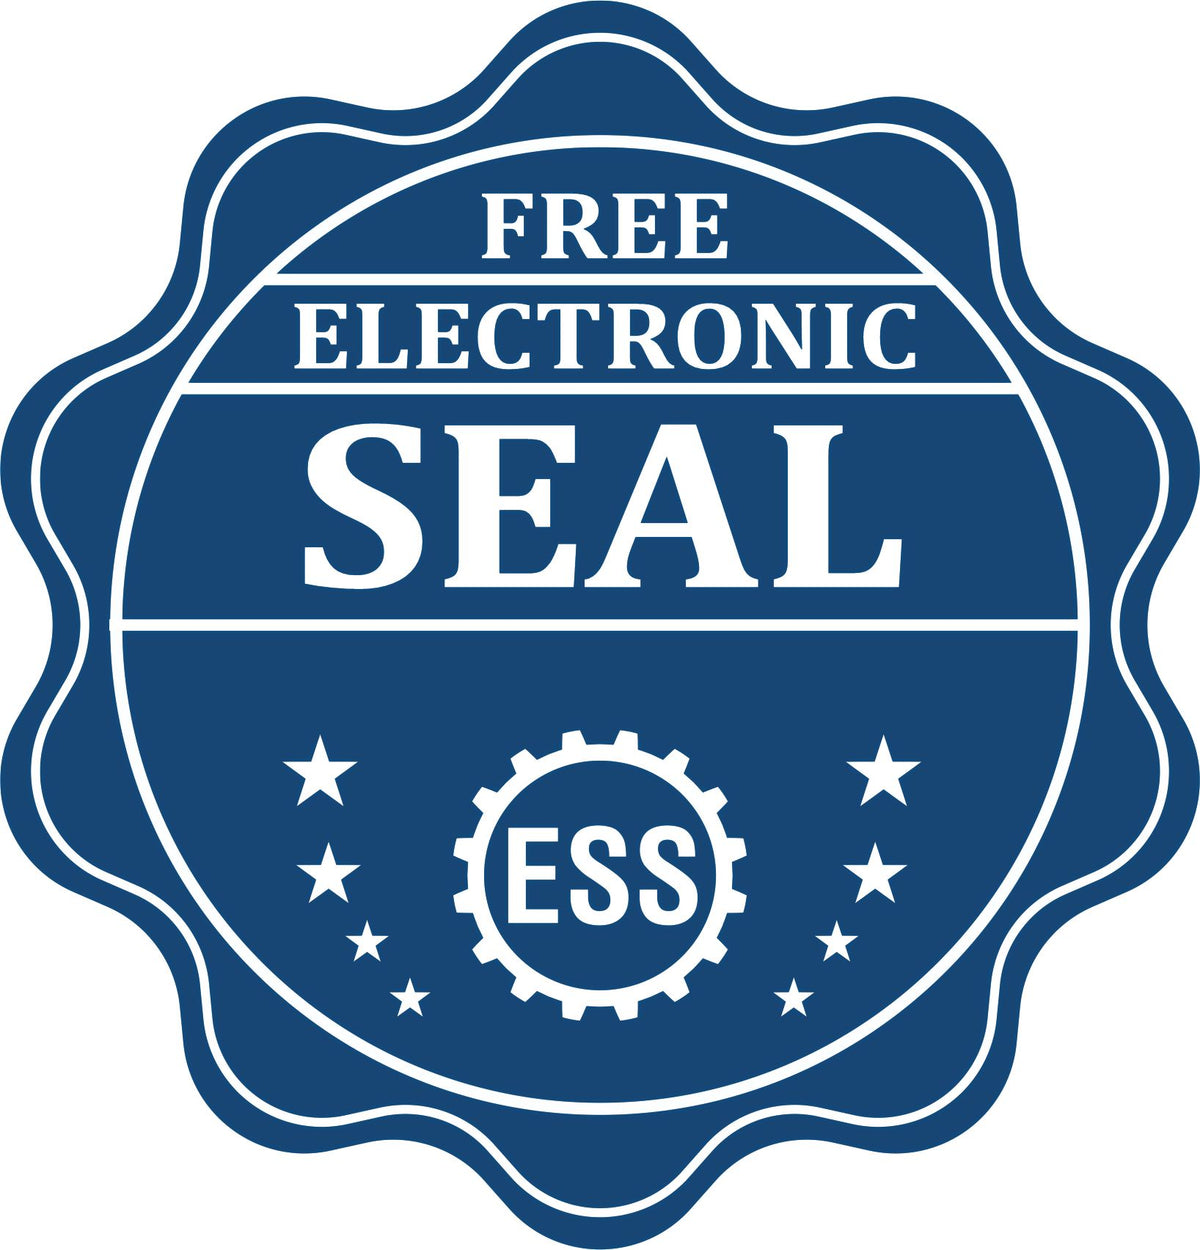 A badge showing a free electronic seal for the Extended Long Reach Iowa Surveyor Embosser with stars and the ESS gear on the emblem.